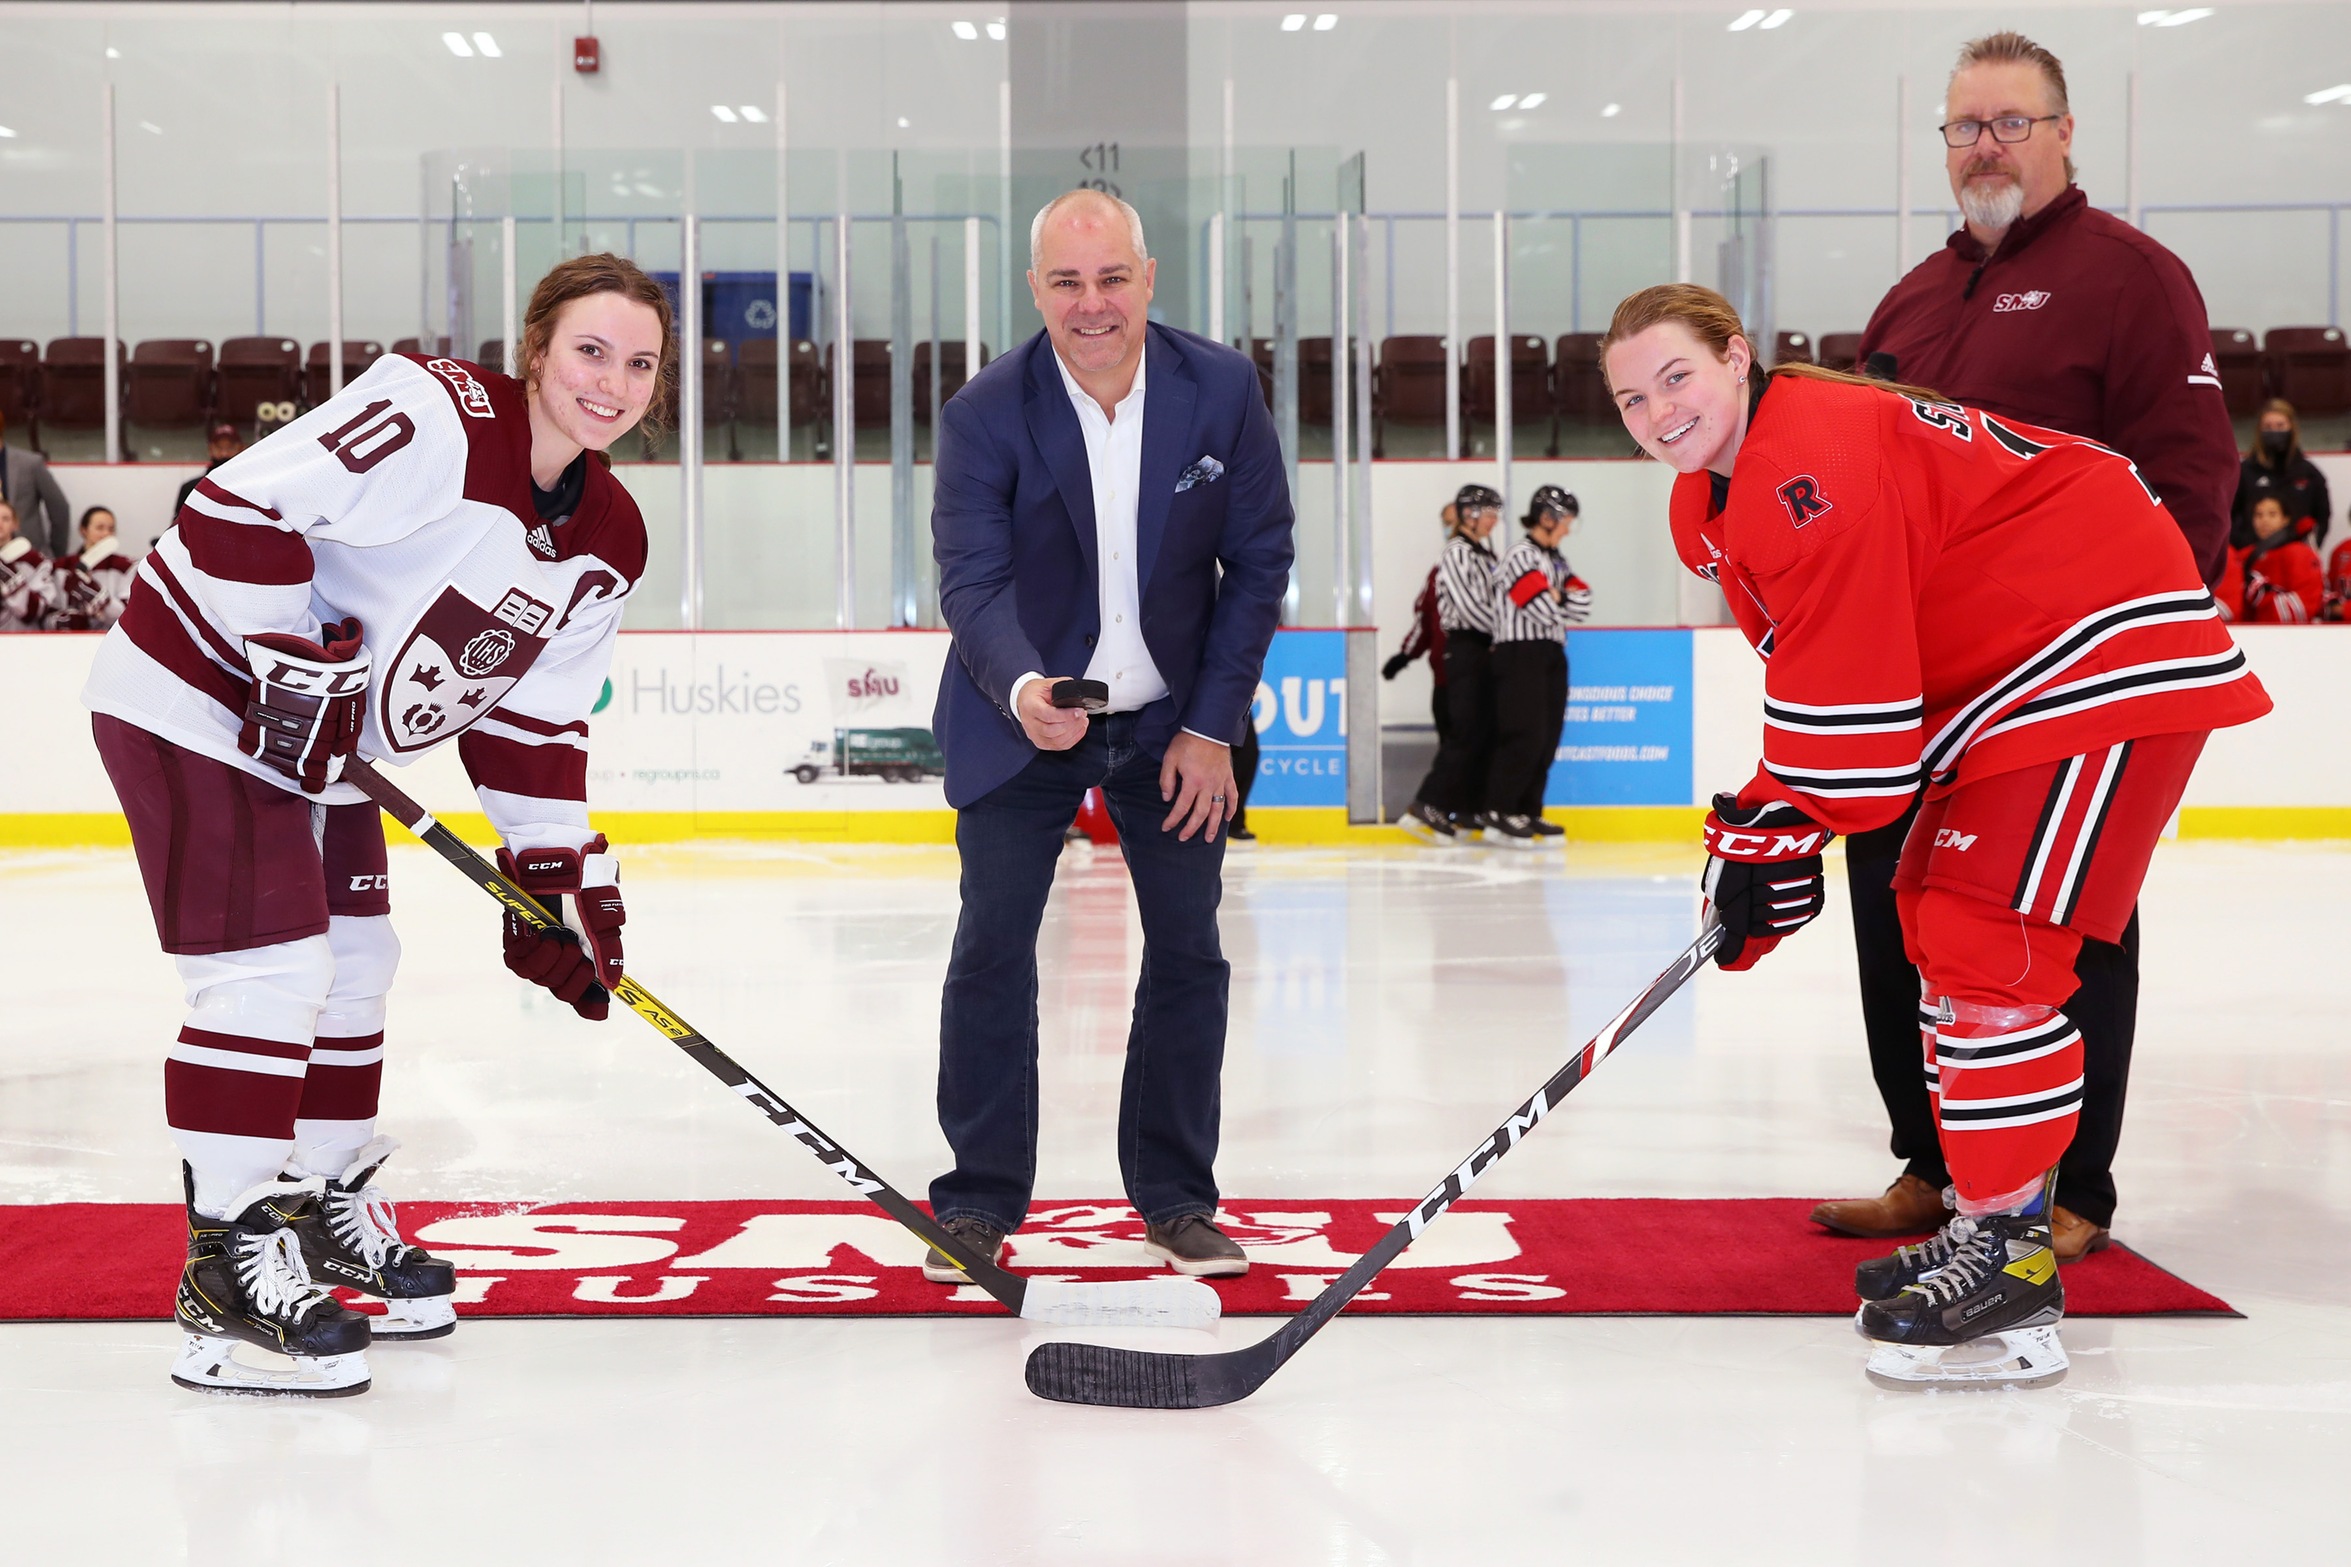 Marc Warner, son of late Huskies legend Bob Warner ('75), drops the ceremonial pre-game faceoff between Huskies captain Alexa McMillan (left) and UNB REDS Ashley Stratton (right), as Saint Mary's Athletic Director Scott Gray looks on.